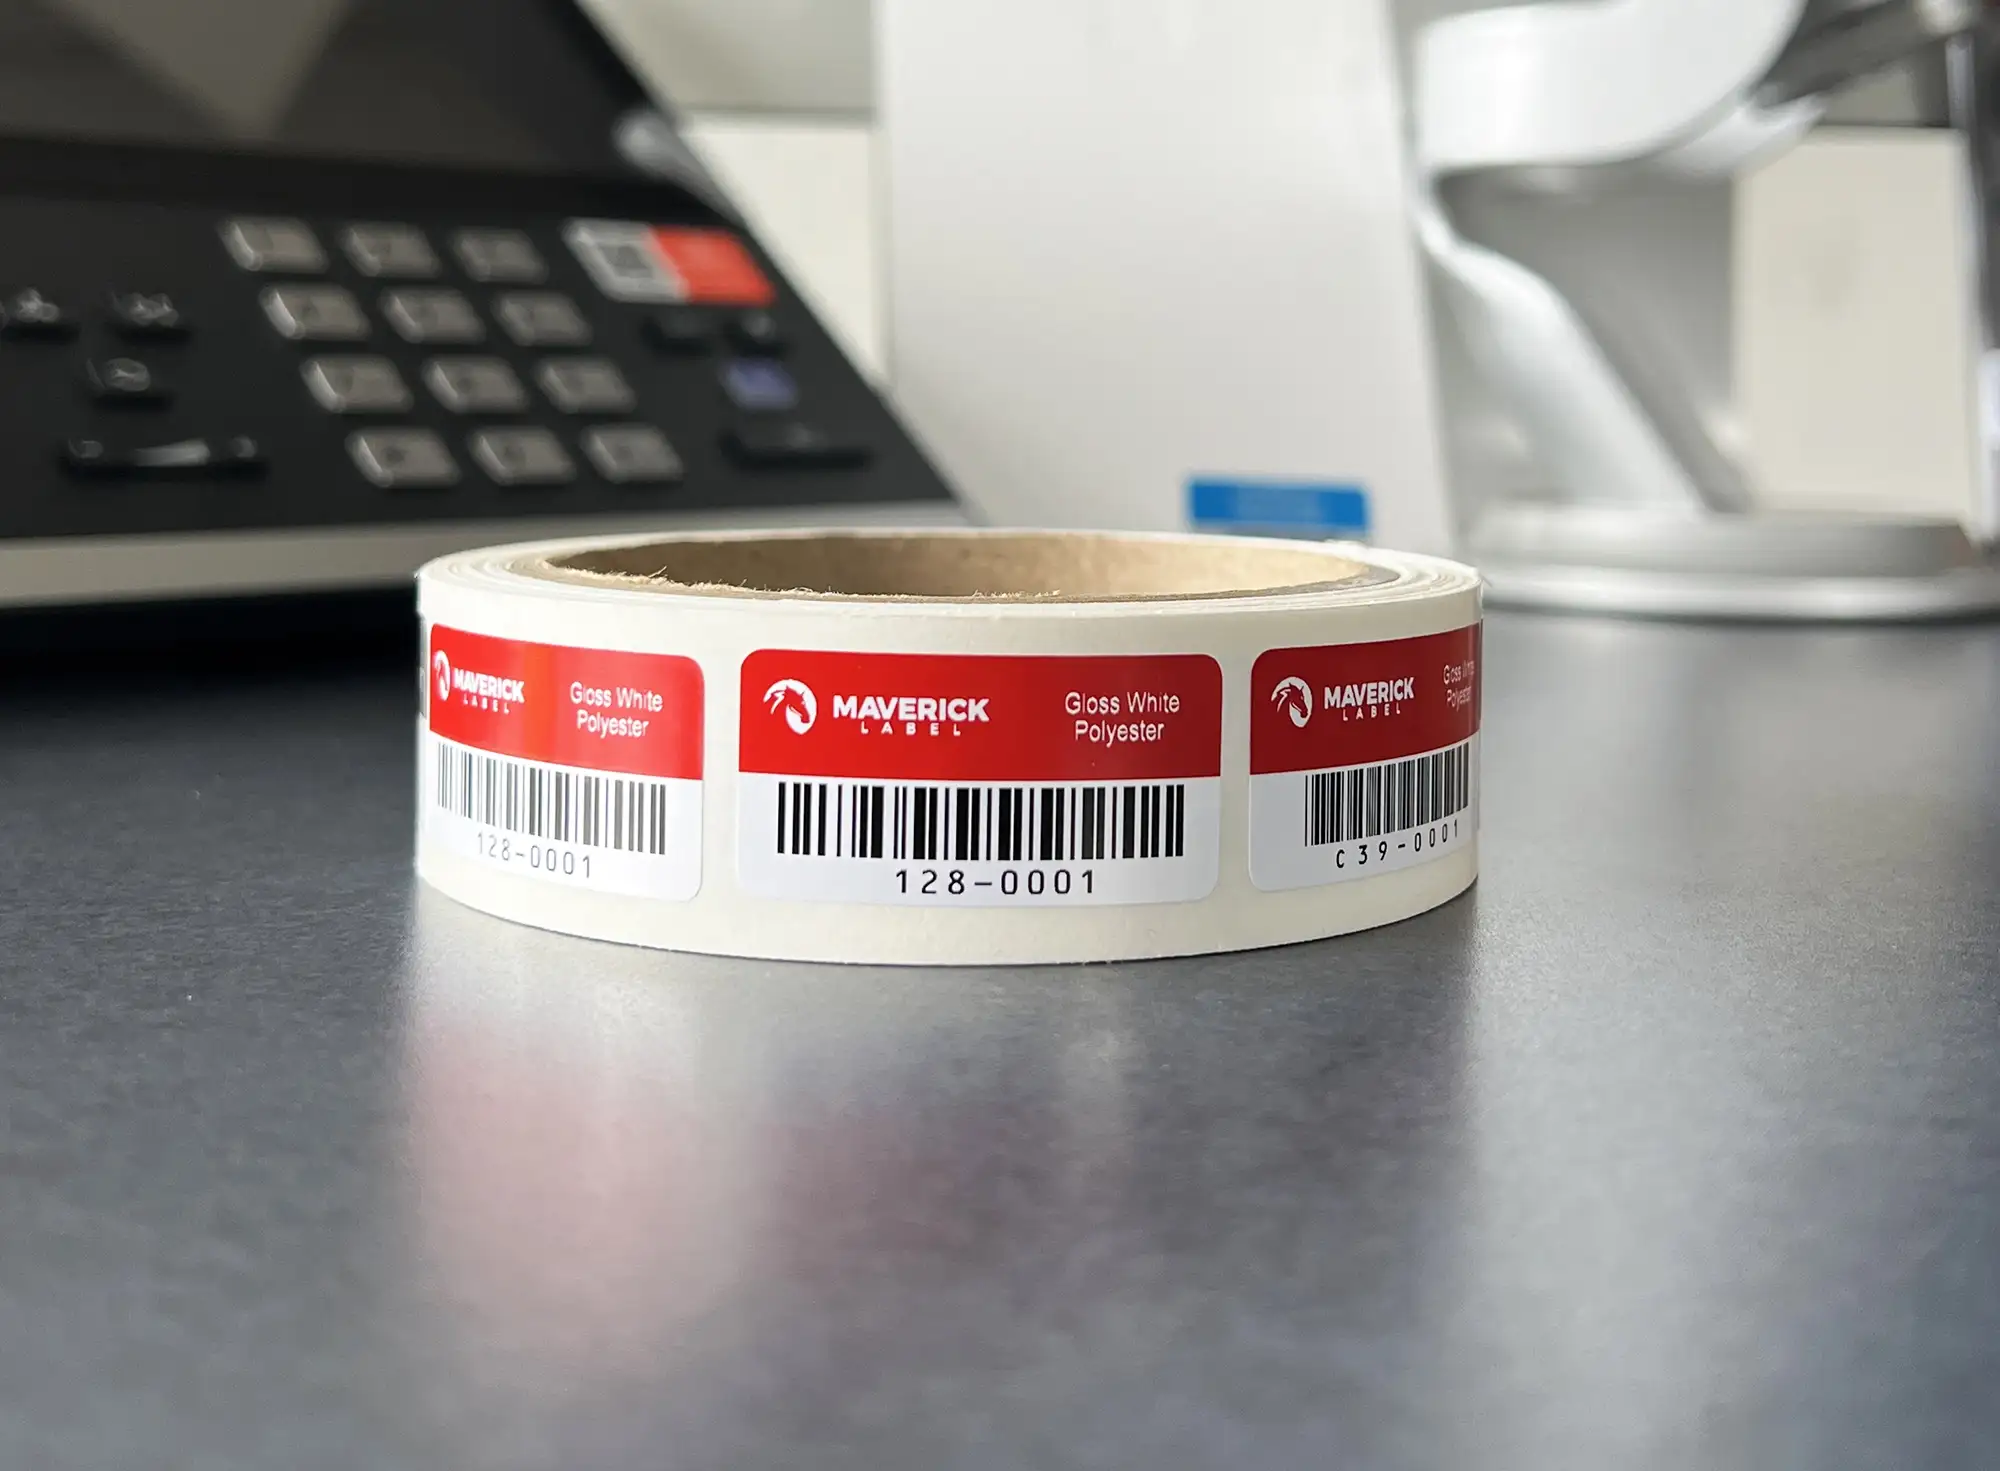 How to Print Asset Tag Labels and What You Need to Know